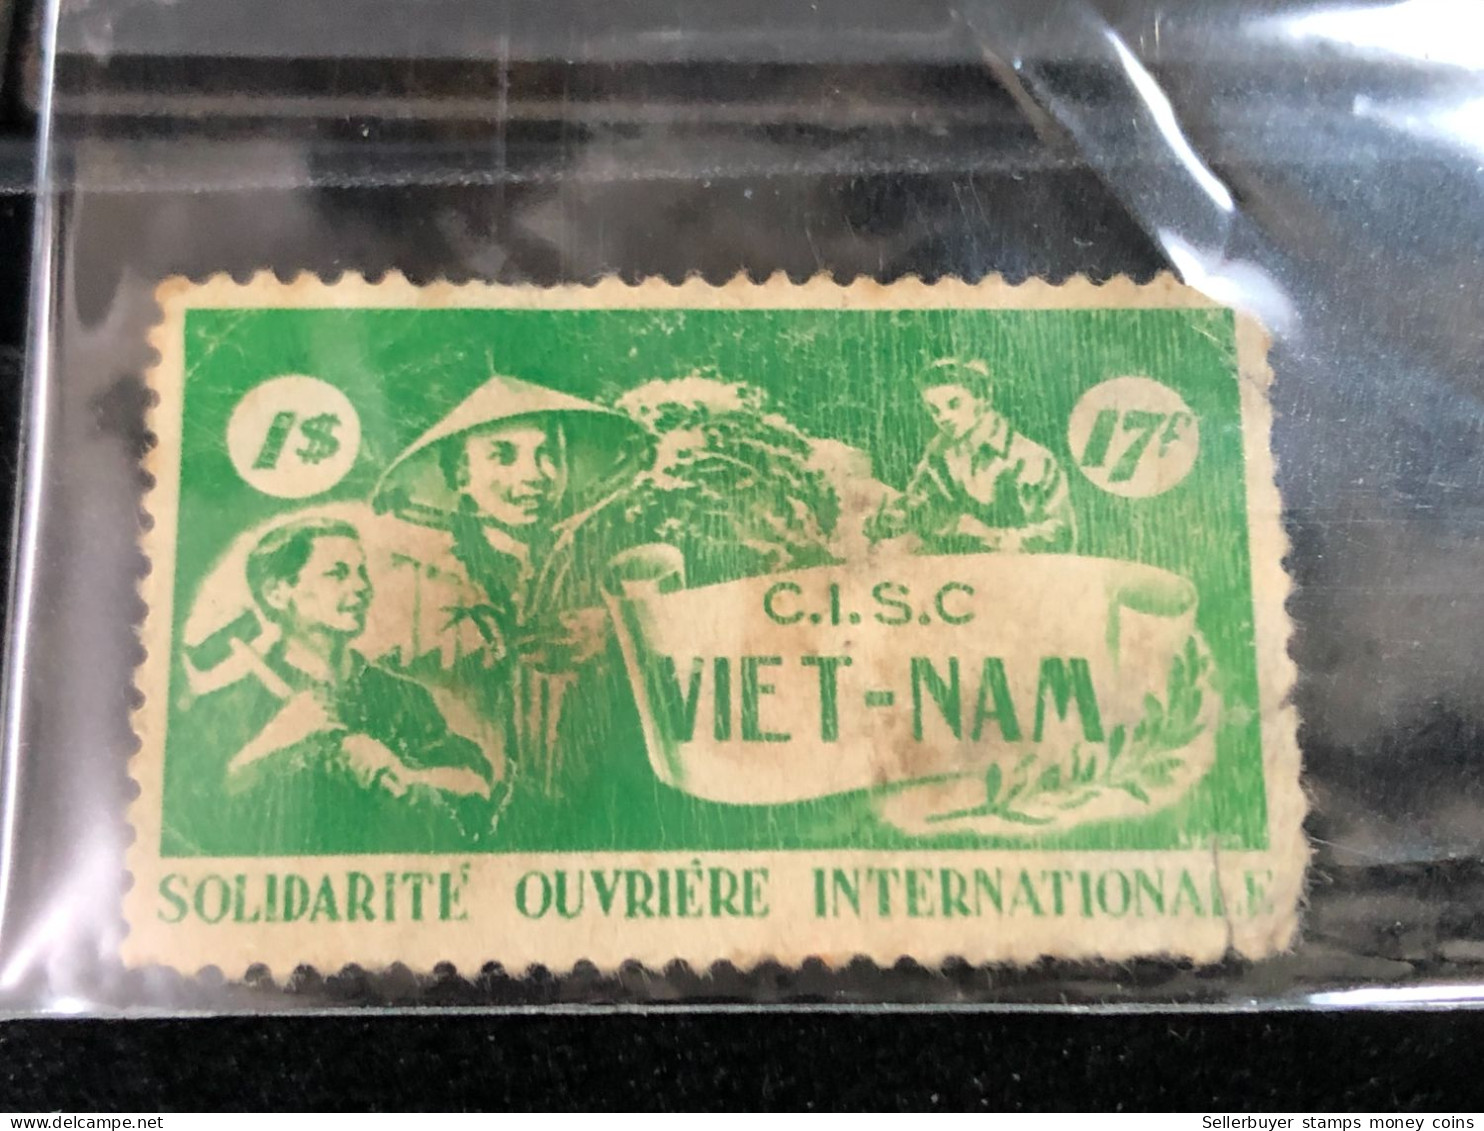 Vietnam South Stamps Before 1975(1$ Wedge PAPER ) 1pcs 1 Stamps Quality Good - Sammlungen